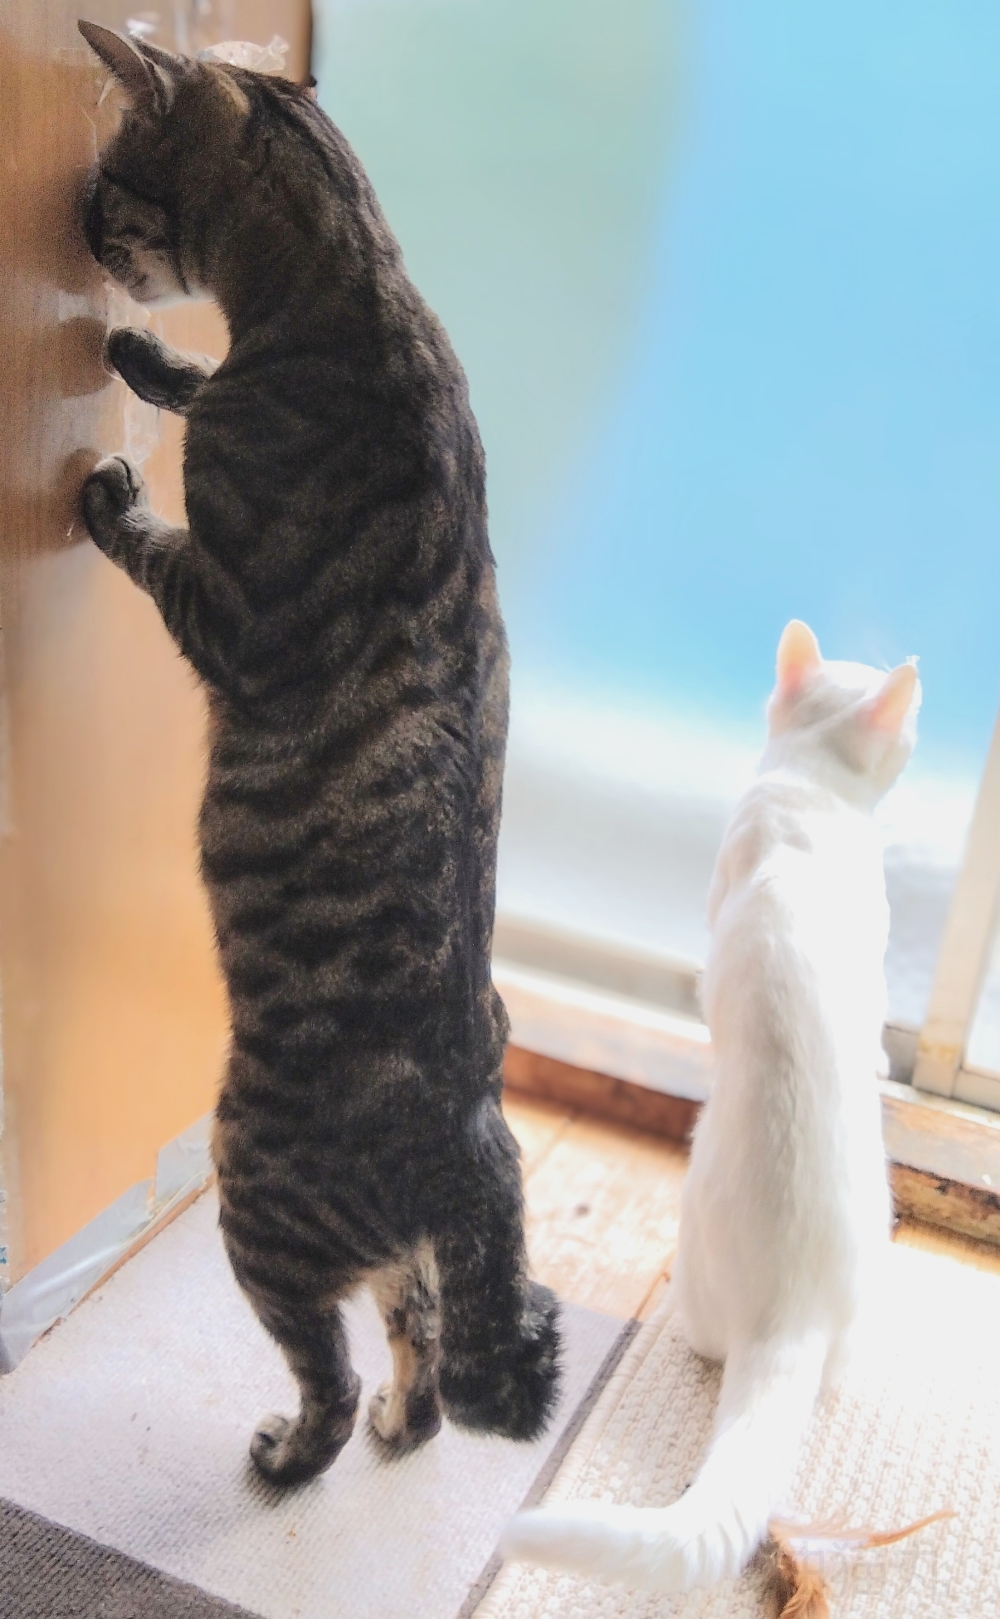 One cat keeps watch while the other peeks into a hole in the wall in what appears to be a high-stakes espionage game. — Picture by Yasuda Aburanekomaru/The Comedy Pet Photo Awards 2024